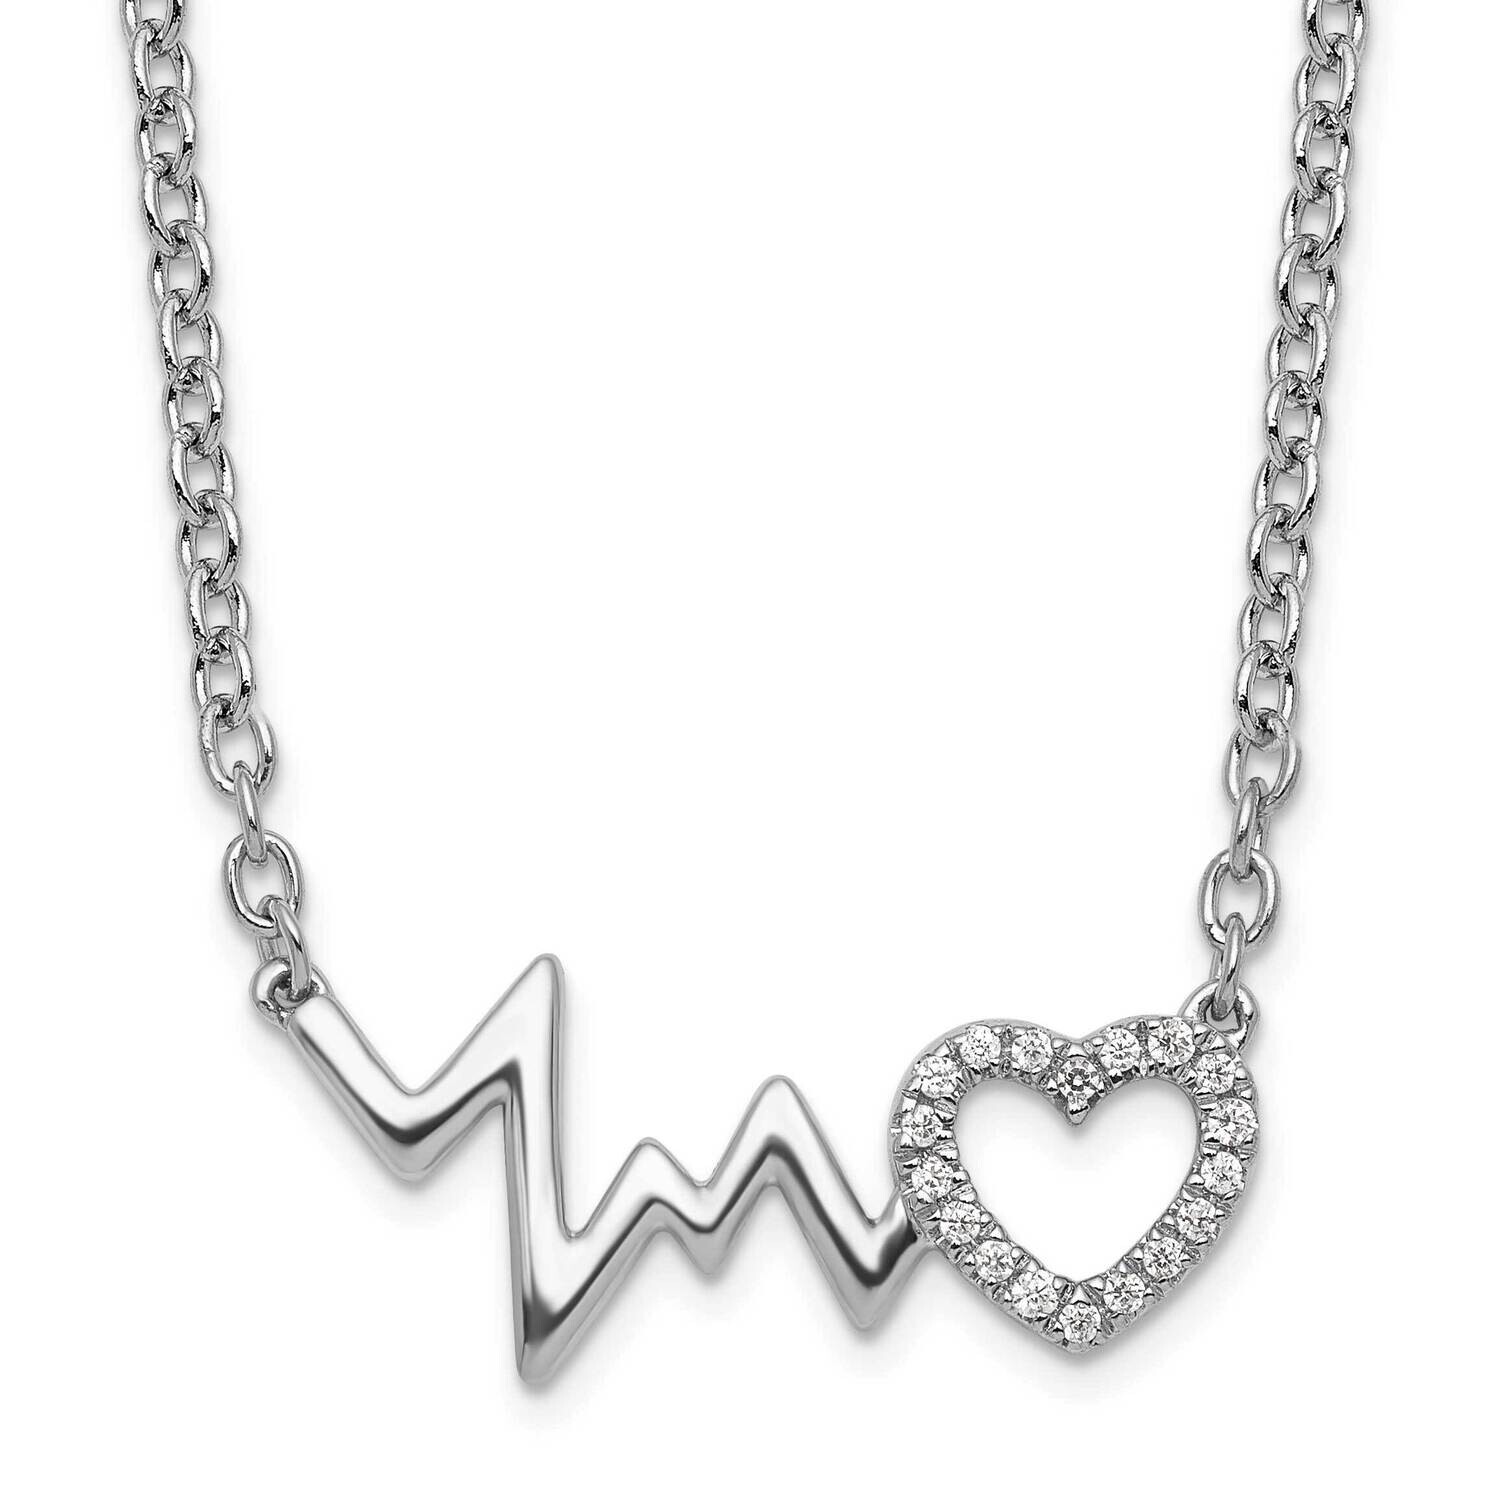 White Ice 18 Inch Diamond Heart Heartbeat Necklace Sterling Silver Rhodium-Plated QW532-18